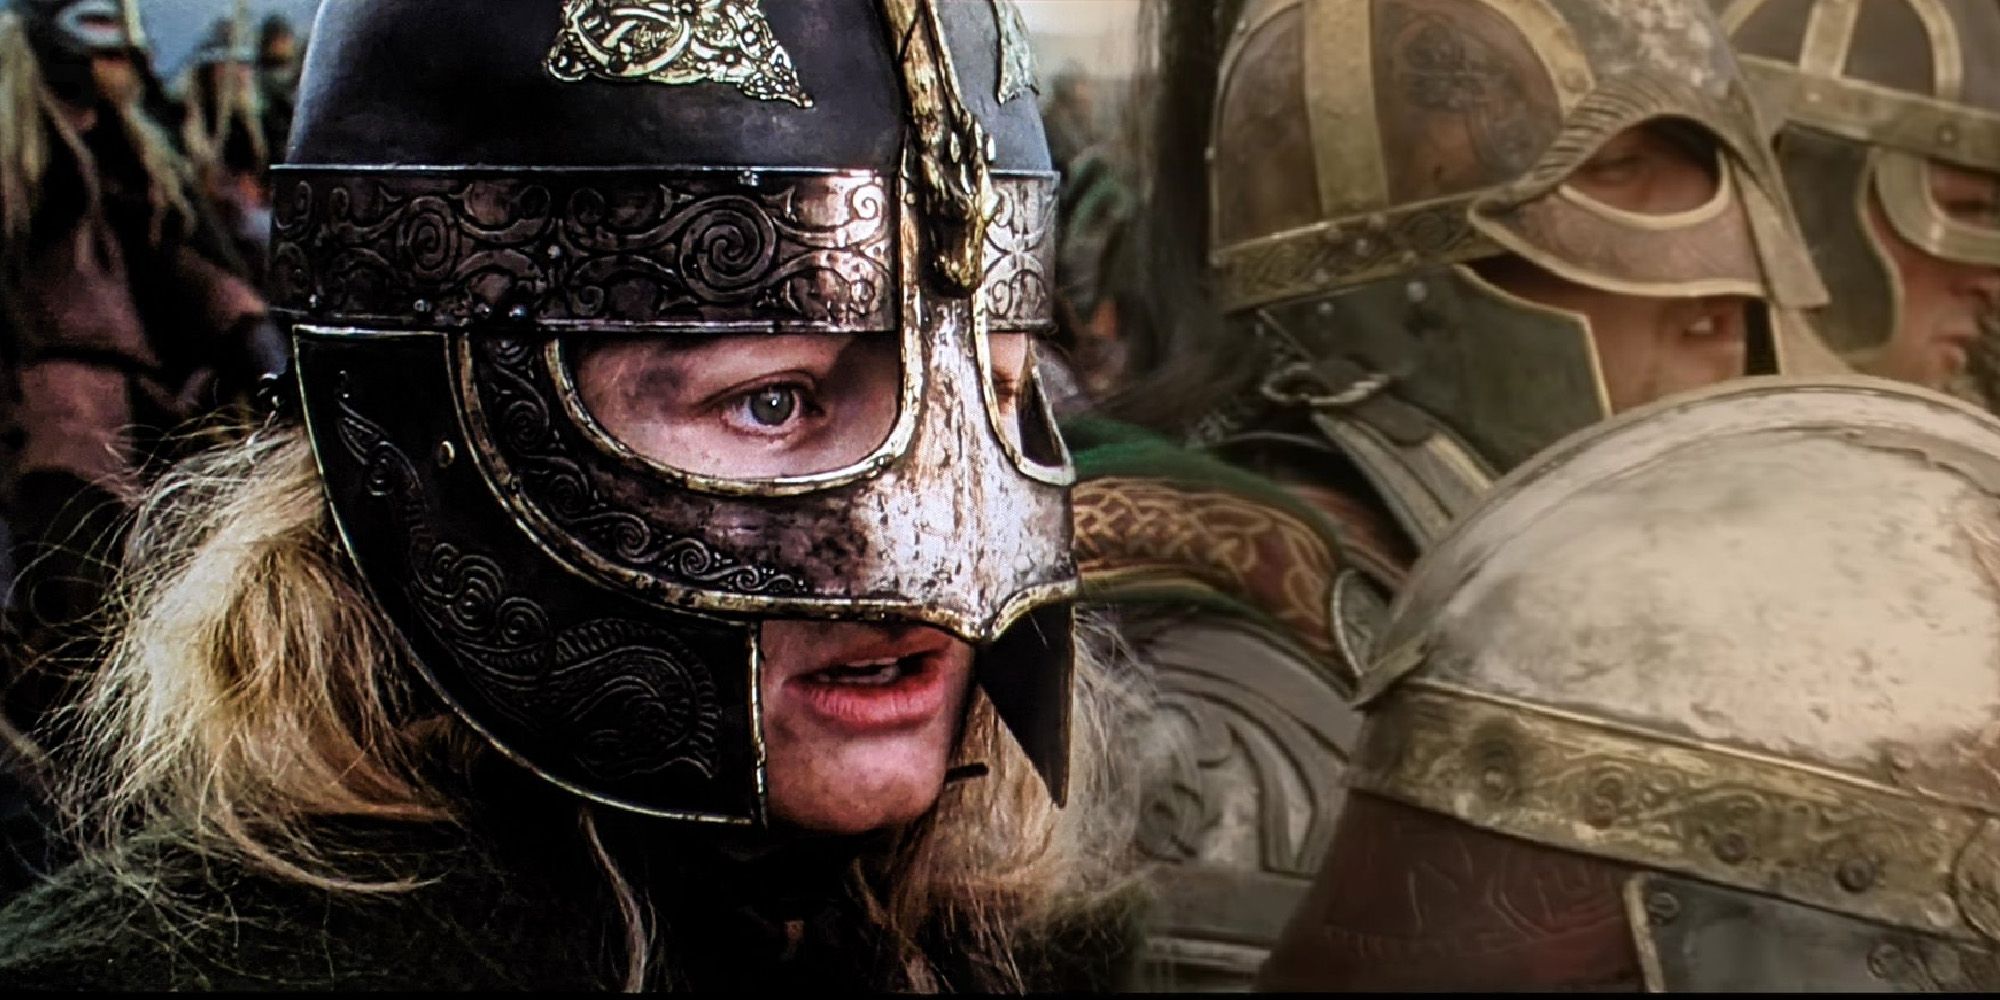 Eowyn looking scared while wearing a helmet before battle in Lord of the Rings: Return of the King